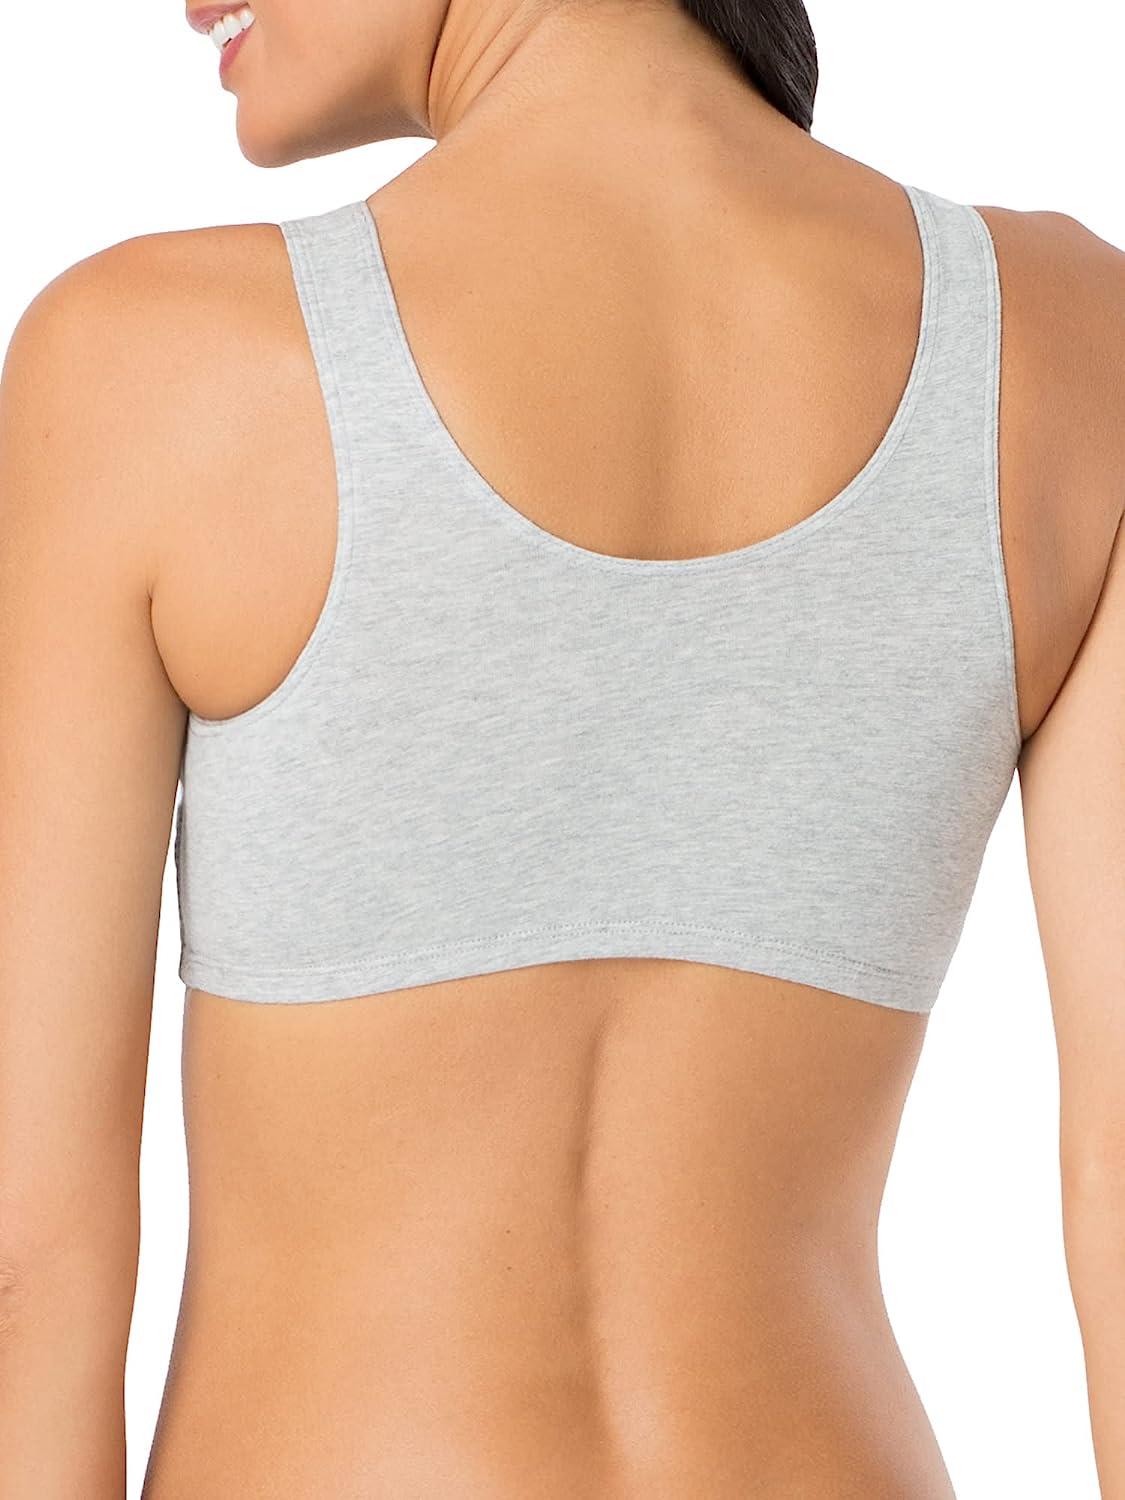 Fruit of the Loom Womens Built Up Tank Style Sports Bra 50 Mint  Chip/White/Grey Heather